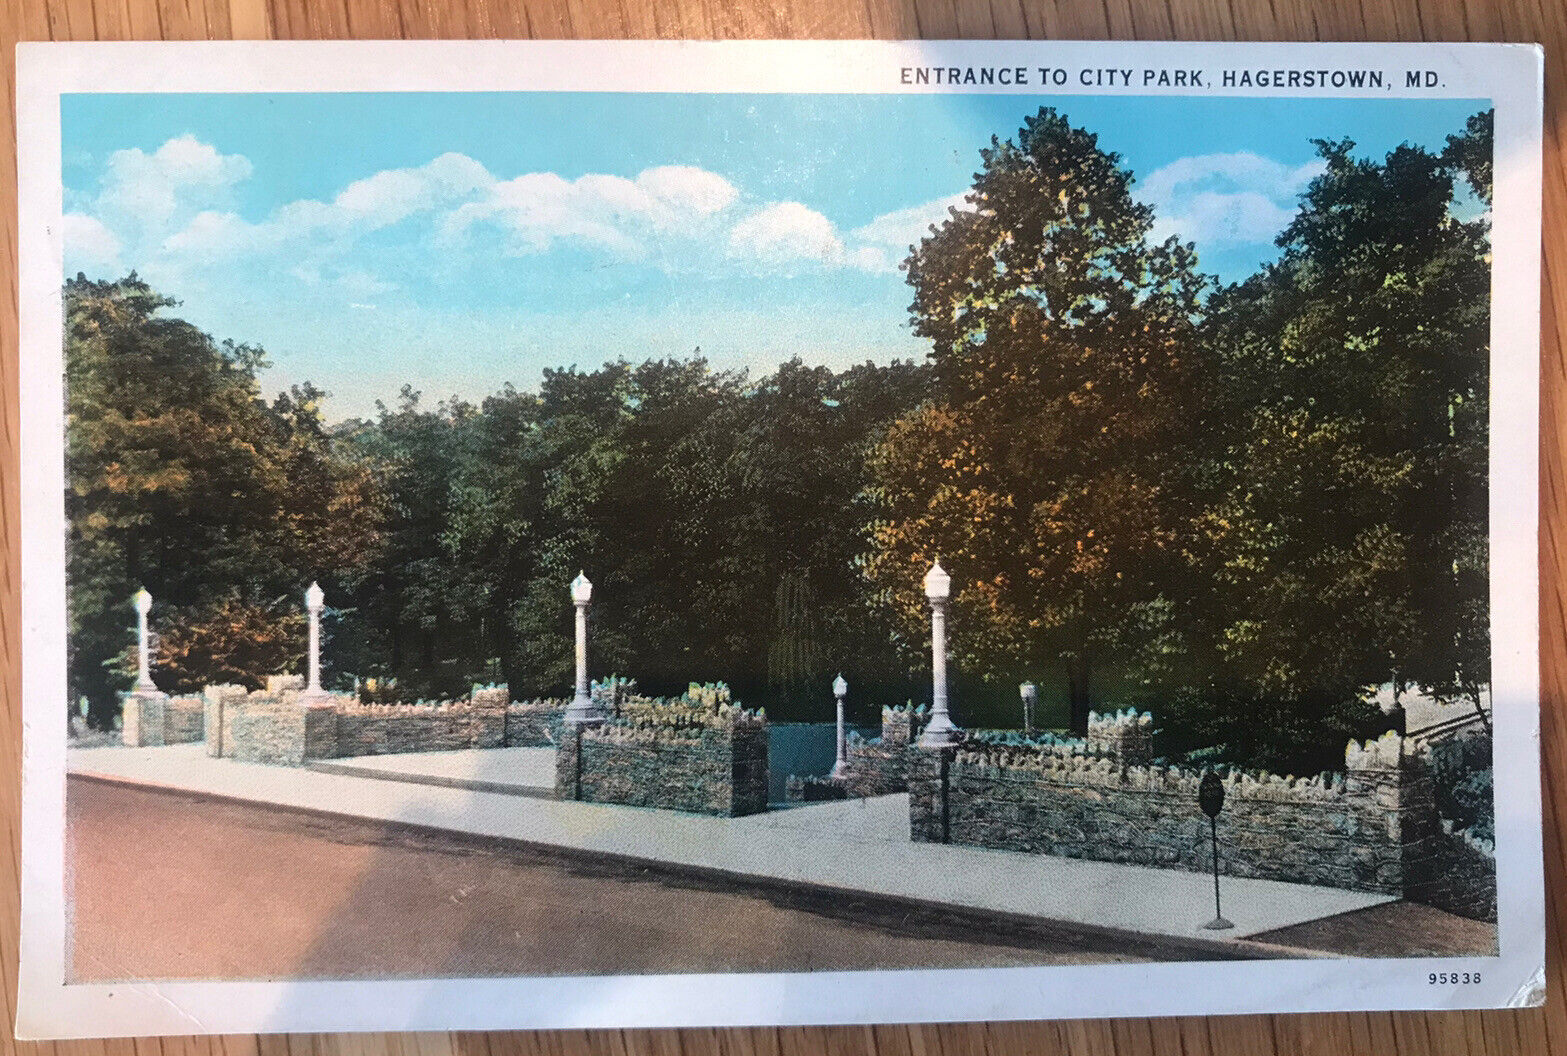 ENTRANCE TO CITY PARK HAGERSTOWN MD- POSTALLY USED CR. 1931